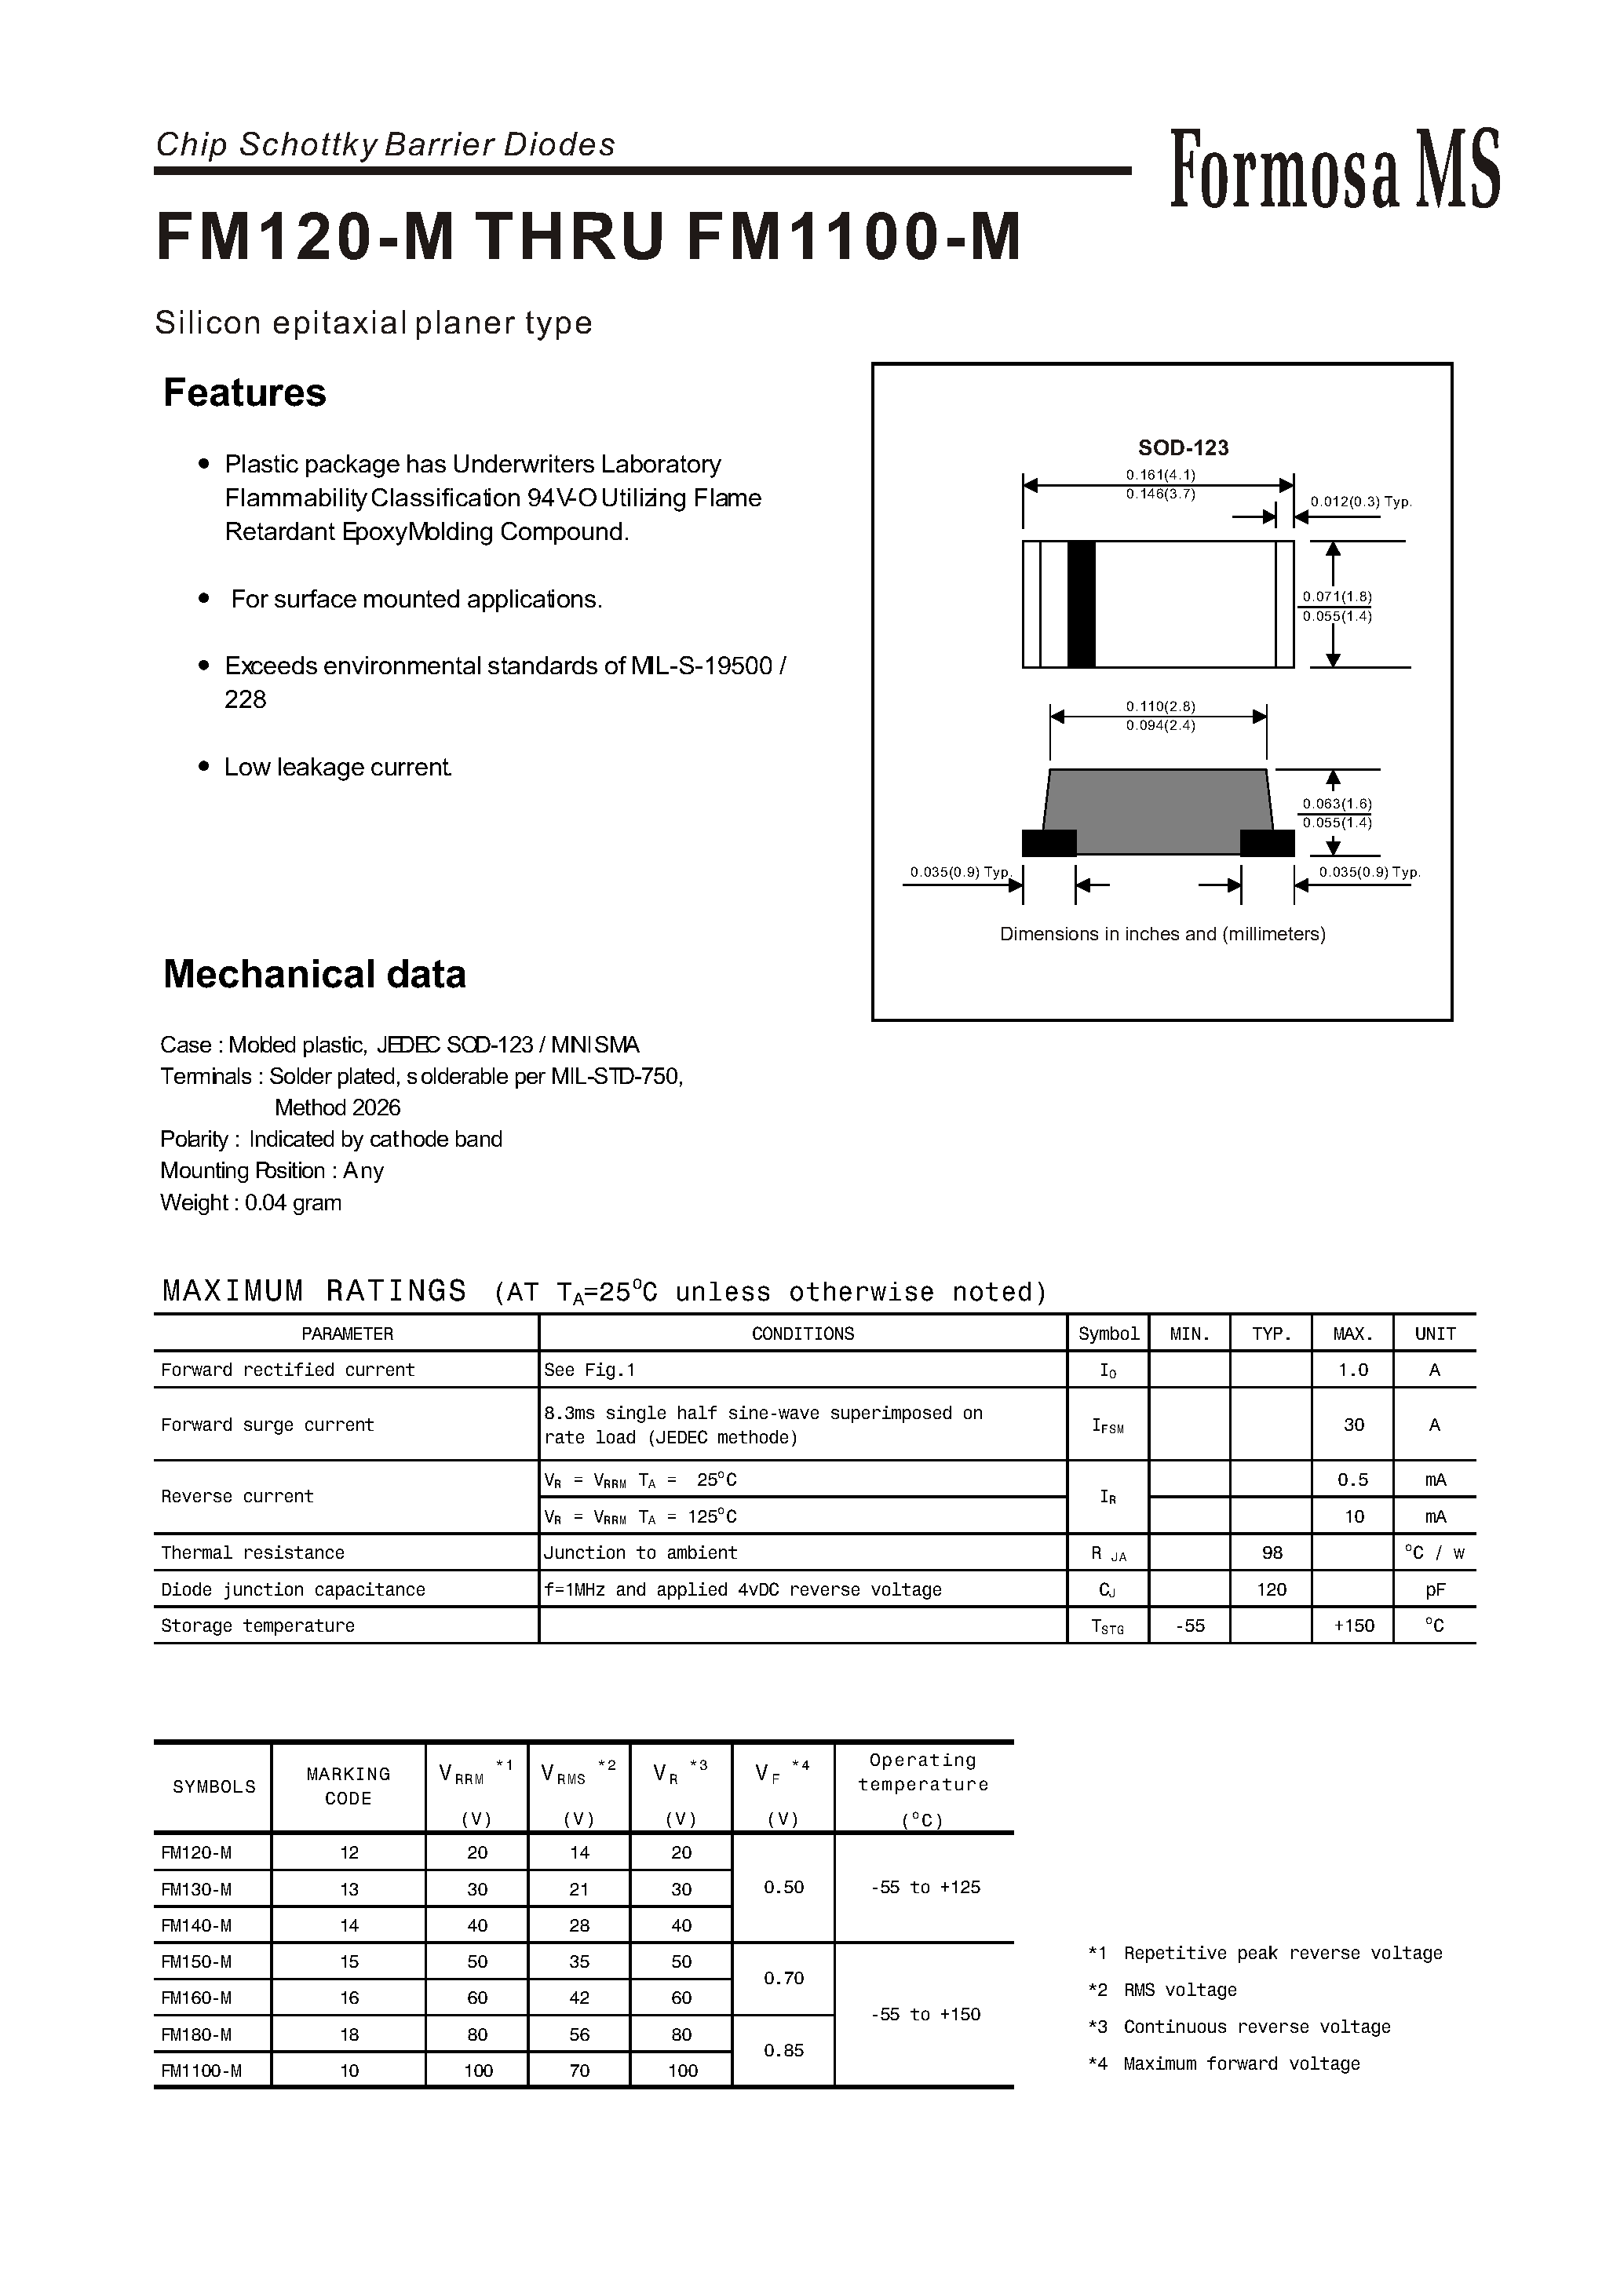 Datasheet FM150-M - Silicon epitaxial planer type page 1